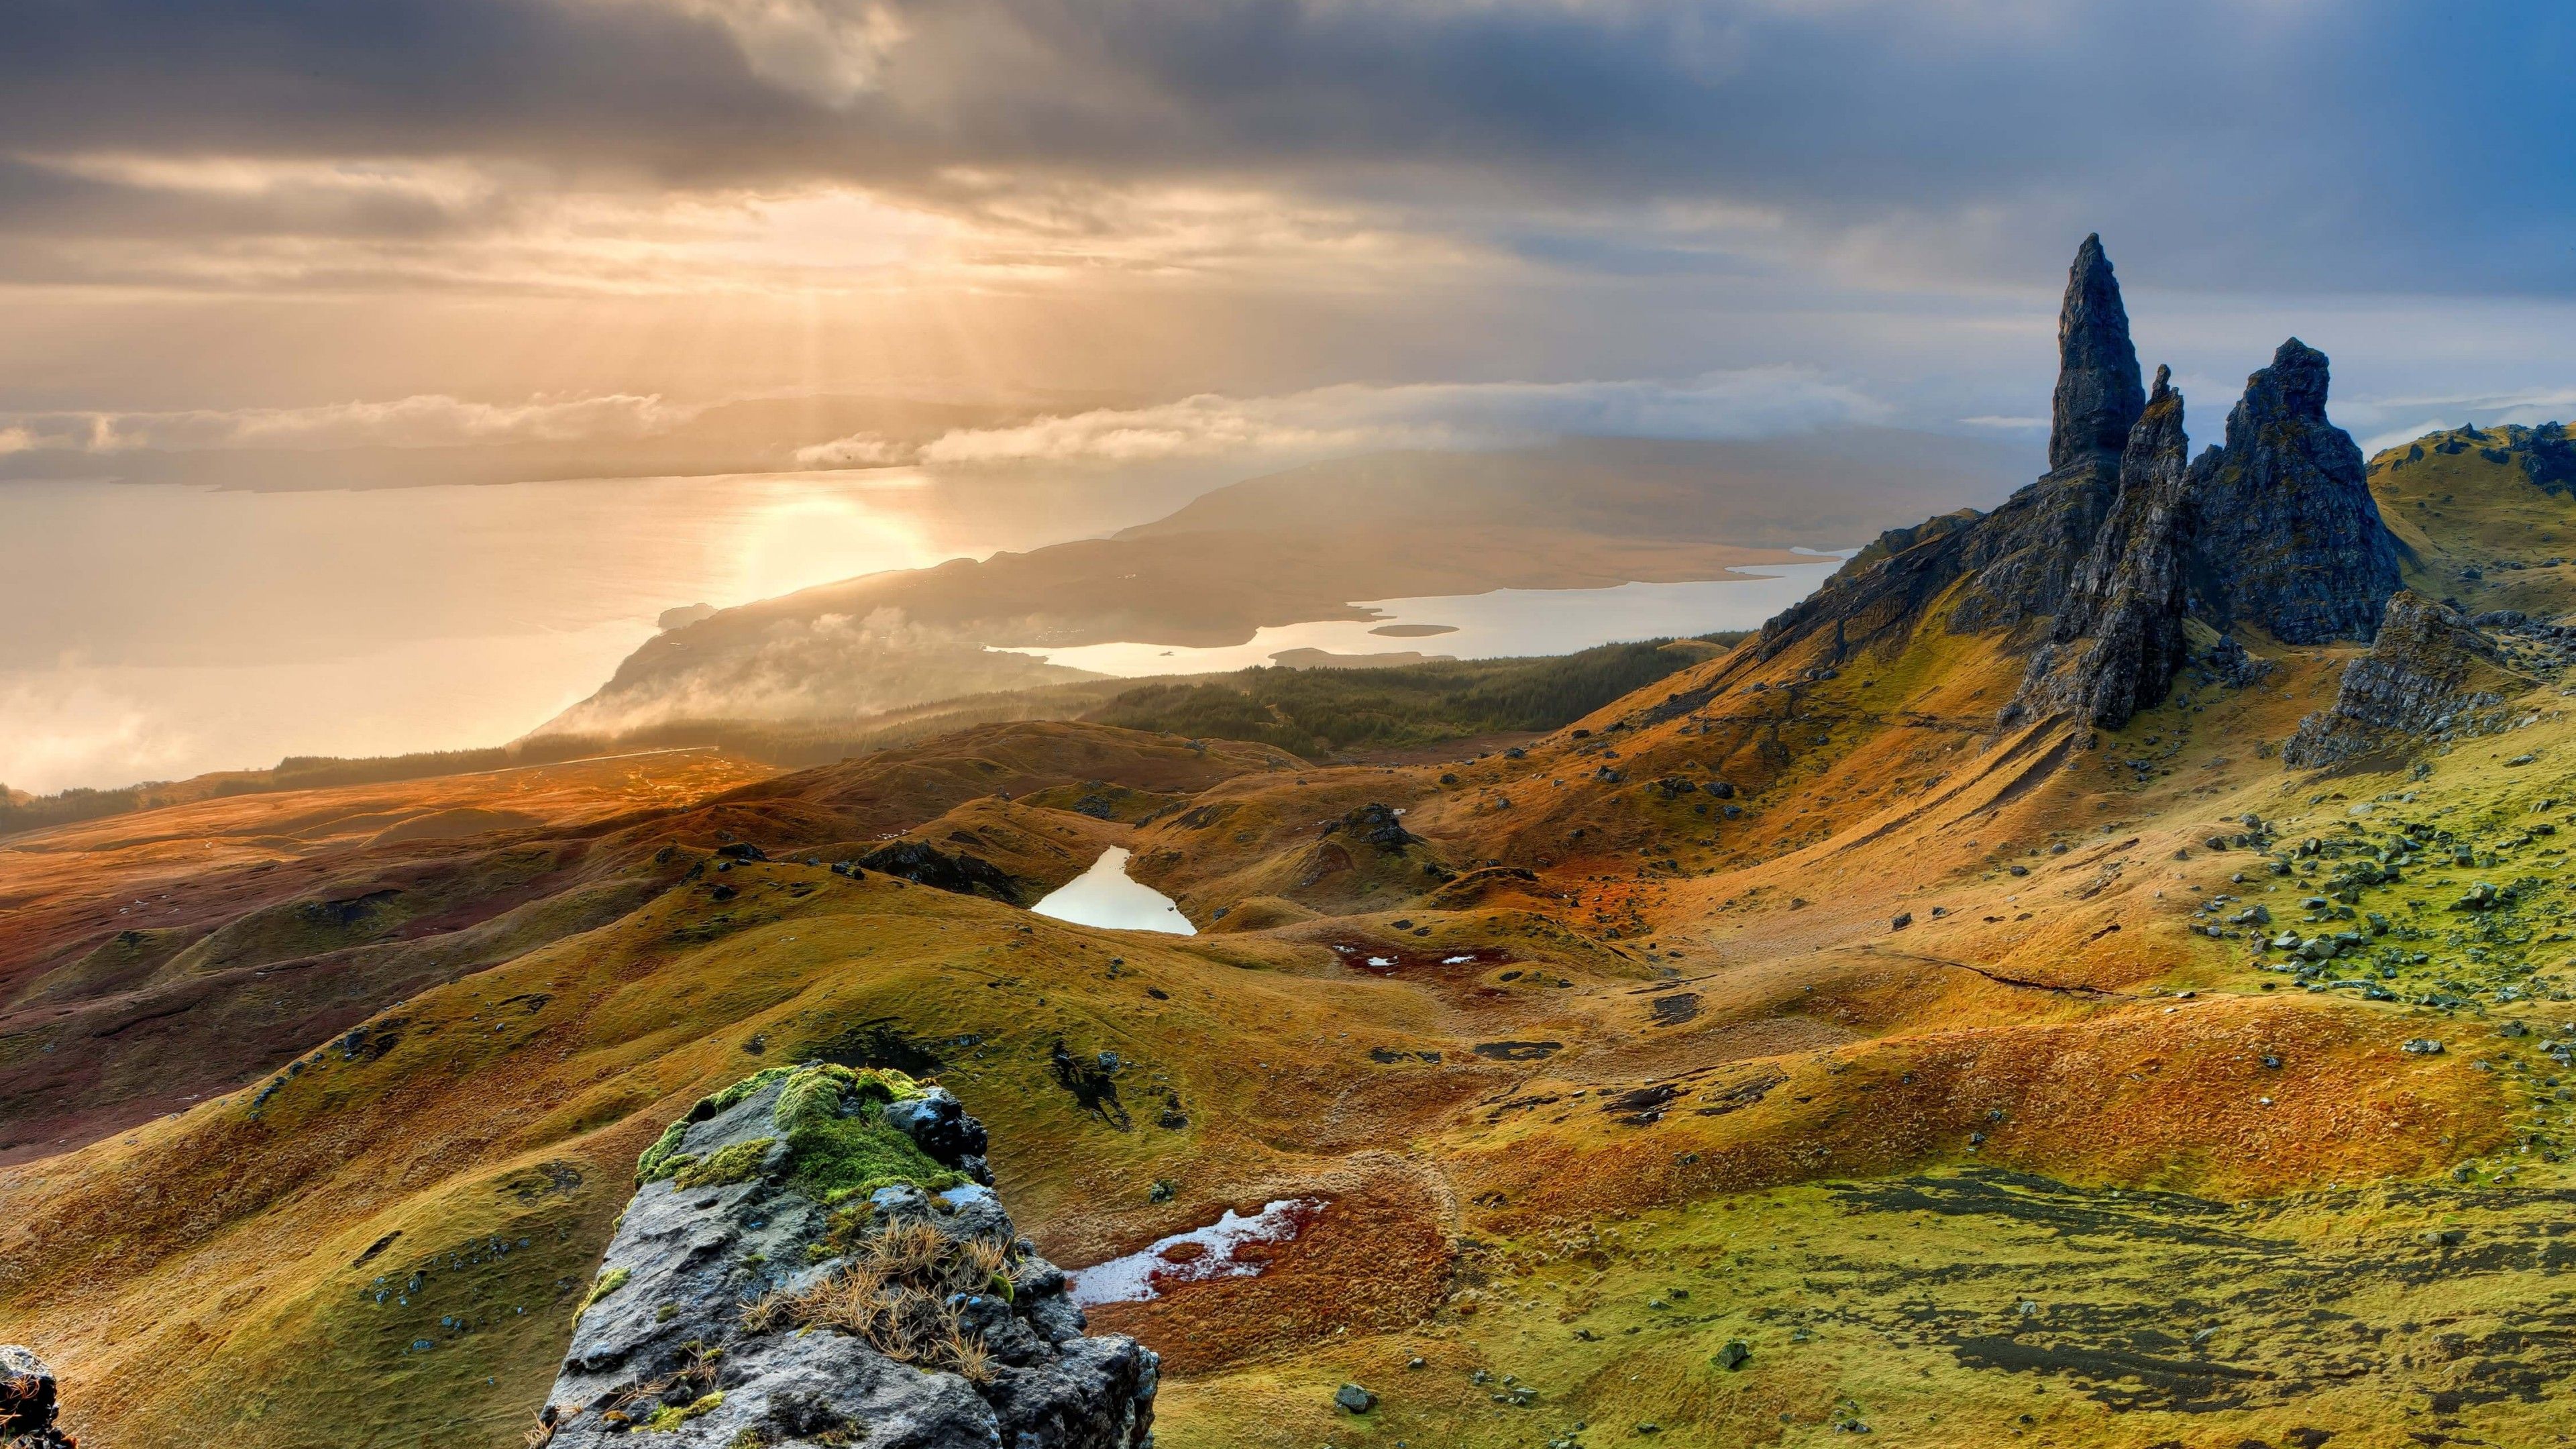 skye 4K wallpapers for your desktop or mobile screen free and easy